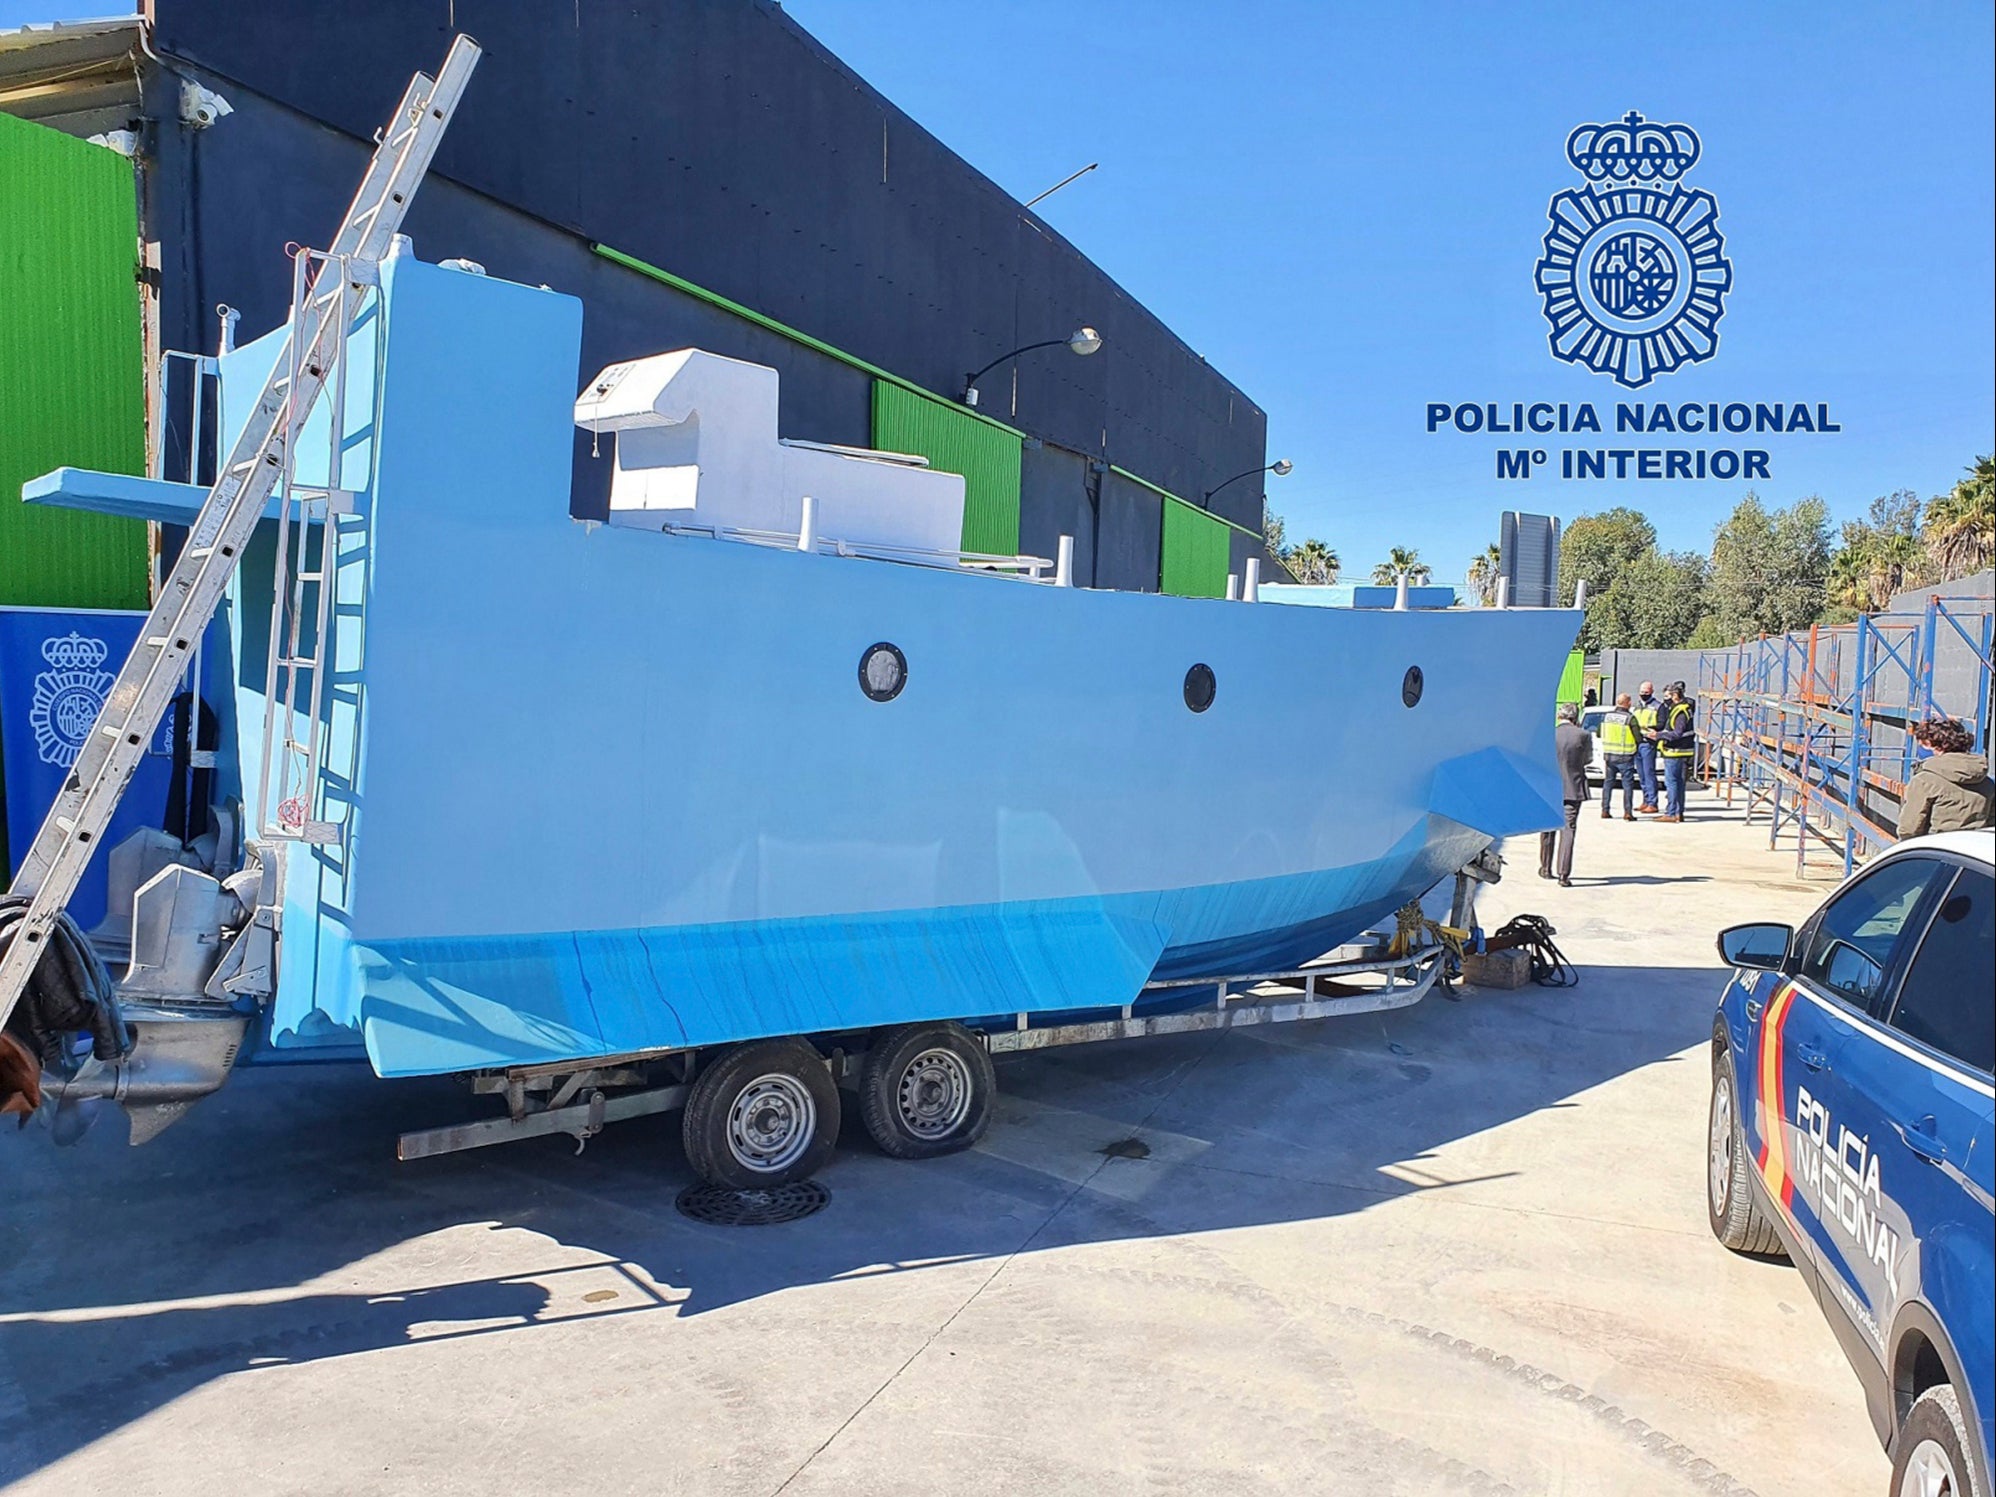 The vessel was discovered in a warehouse in Málaga last month while it was being built and police say it never sailed